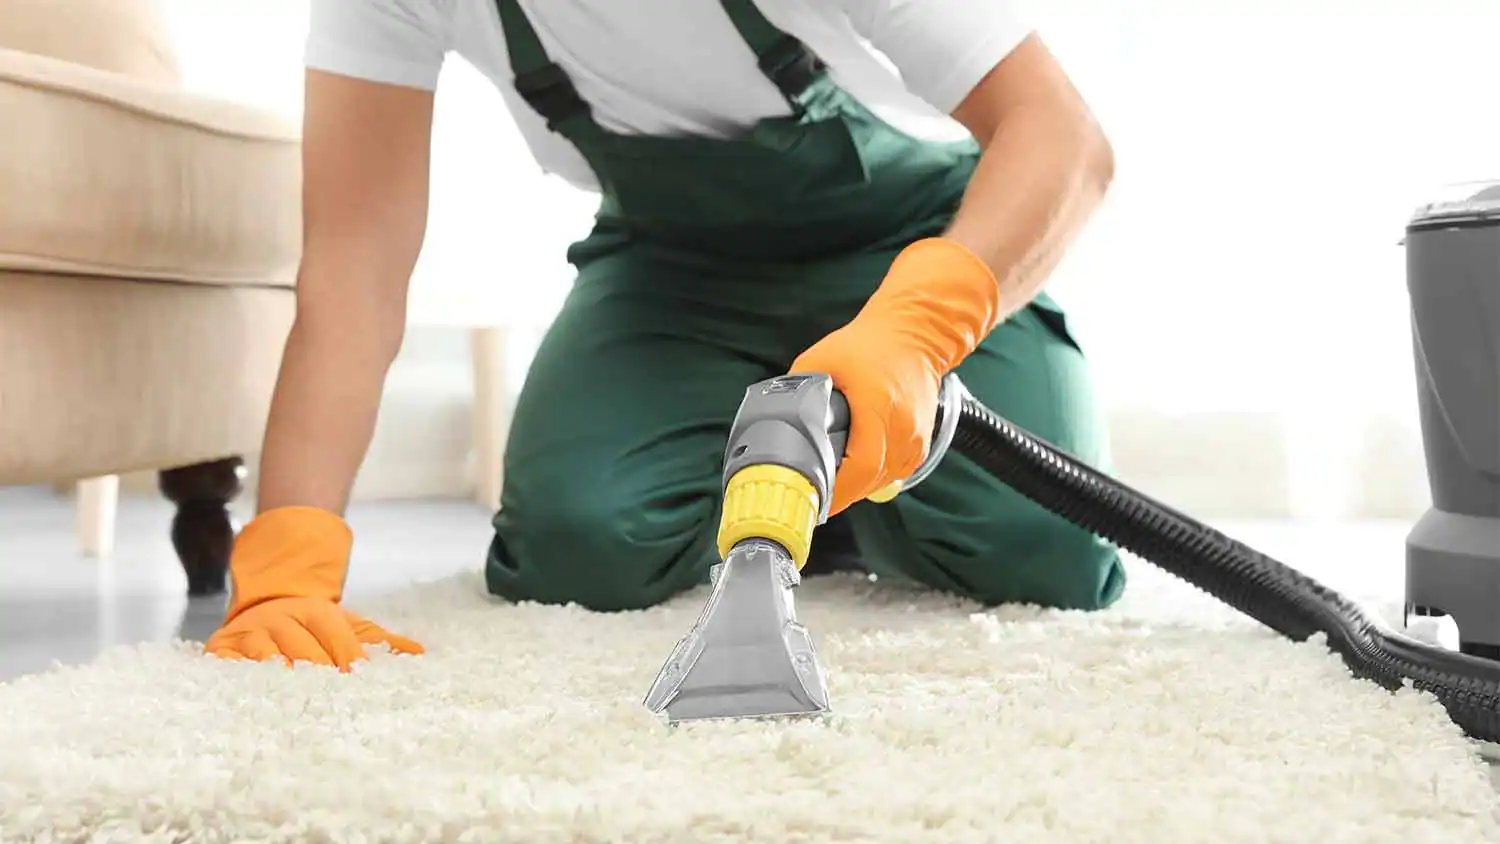 Carpet Cleaning Supplies